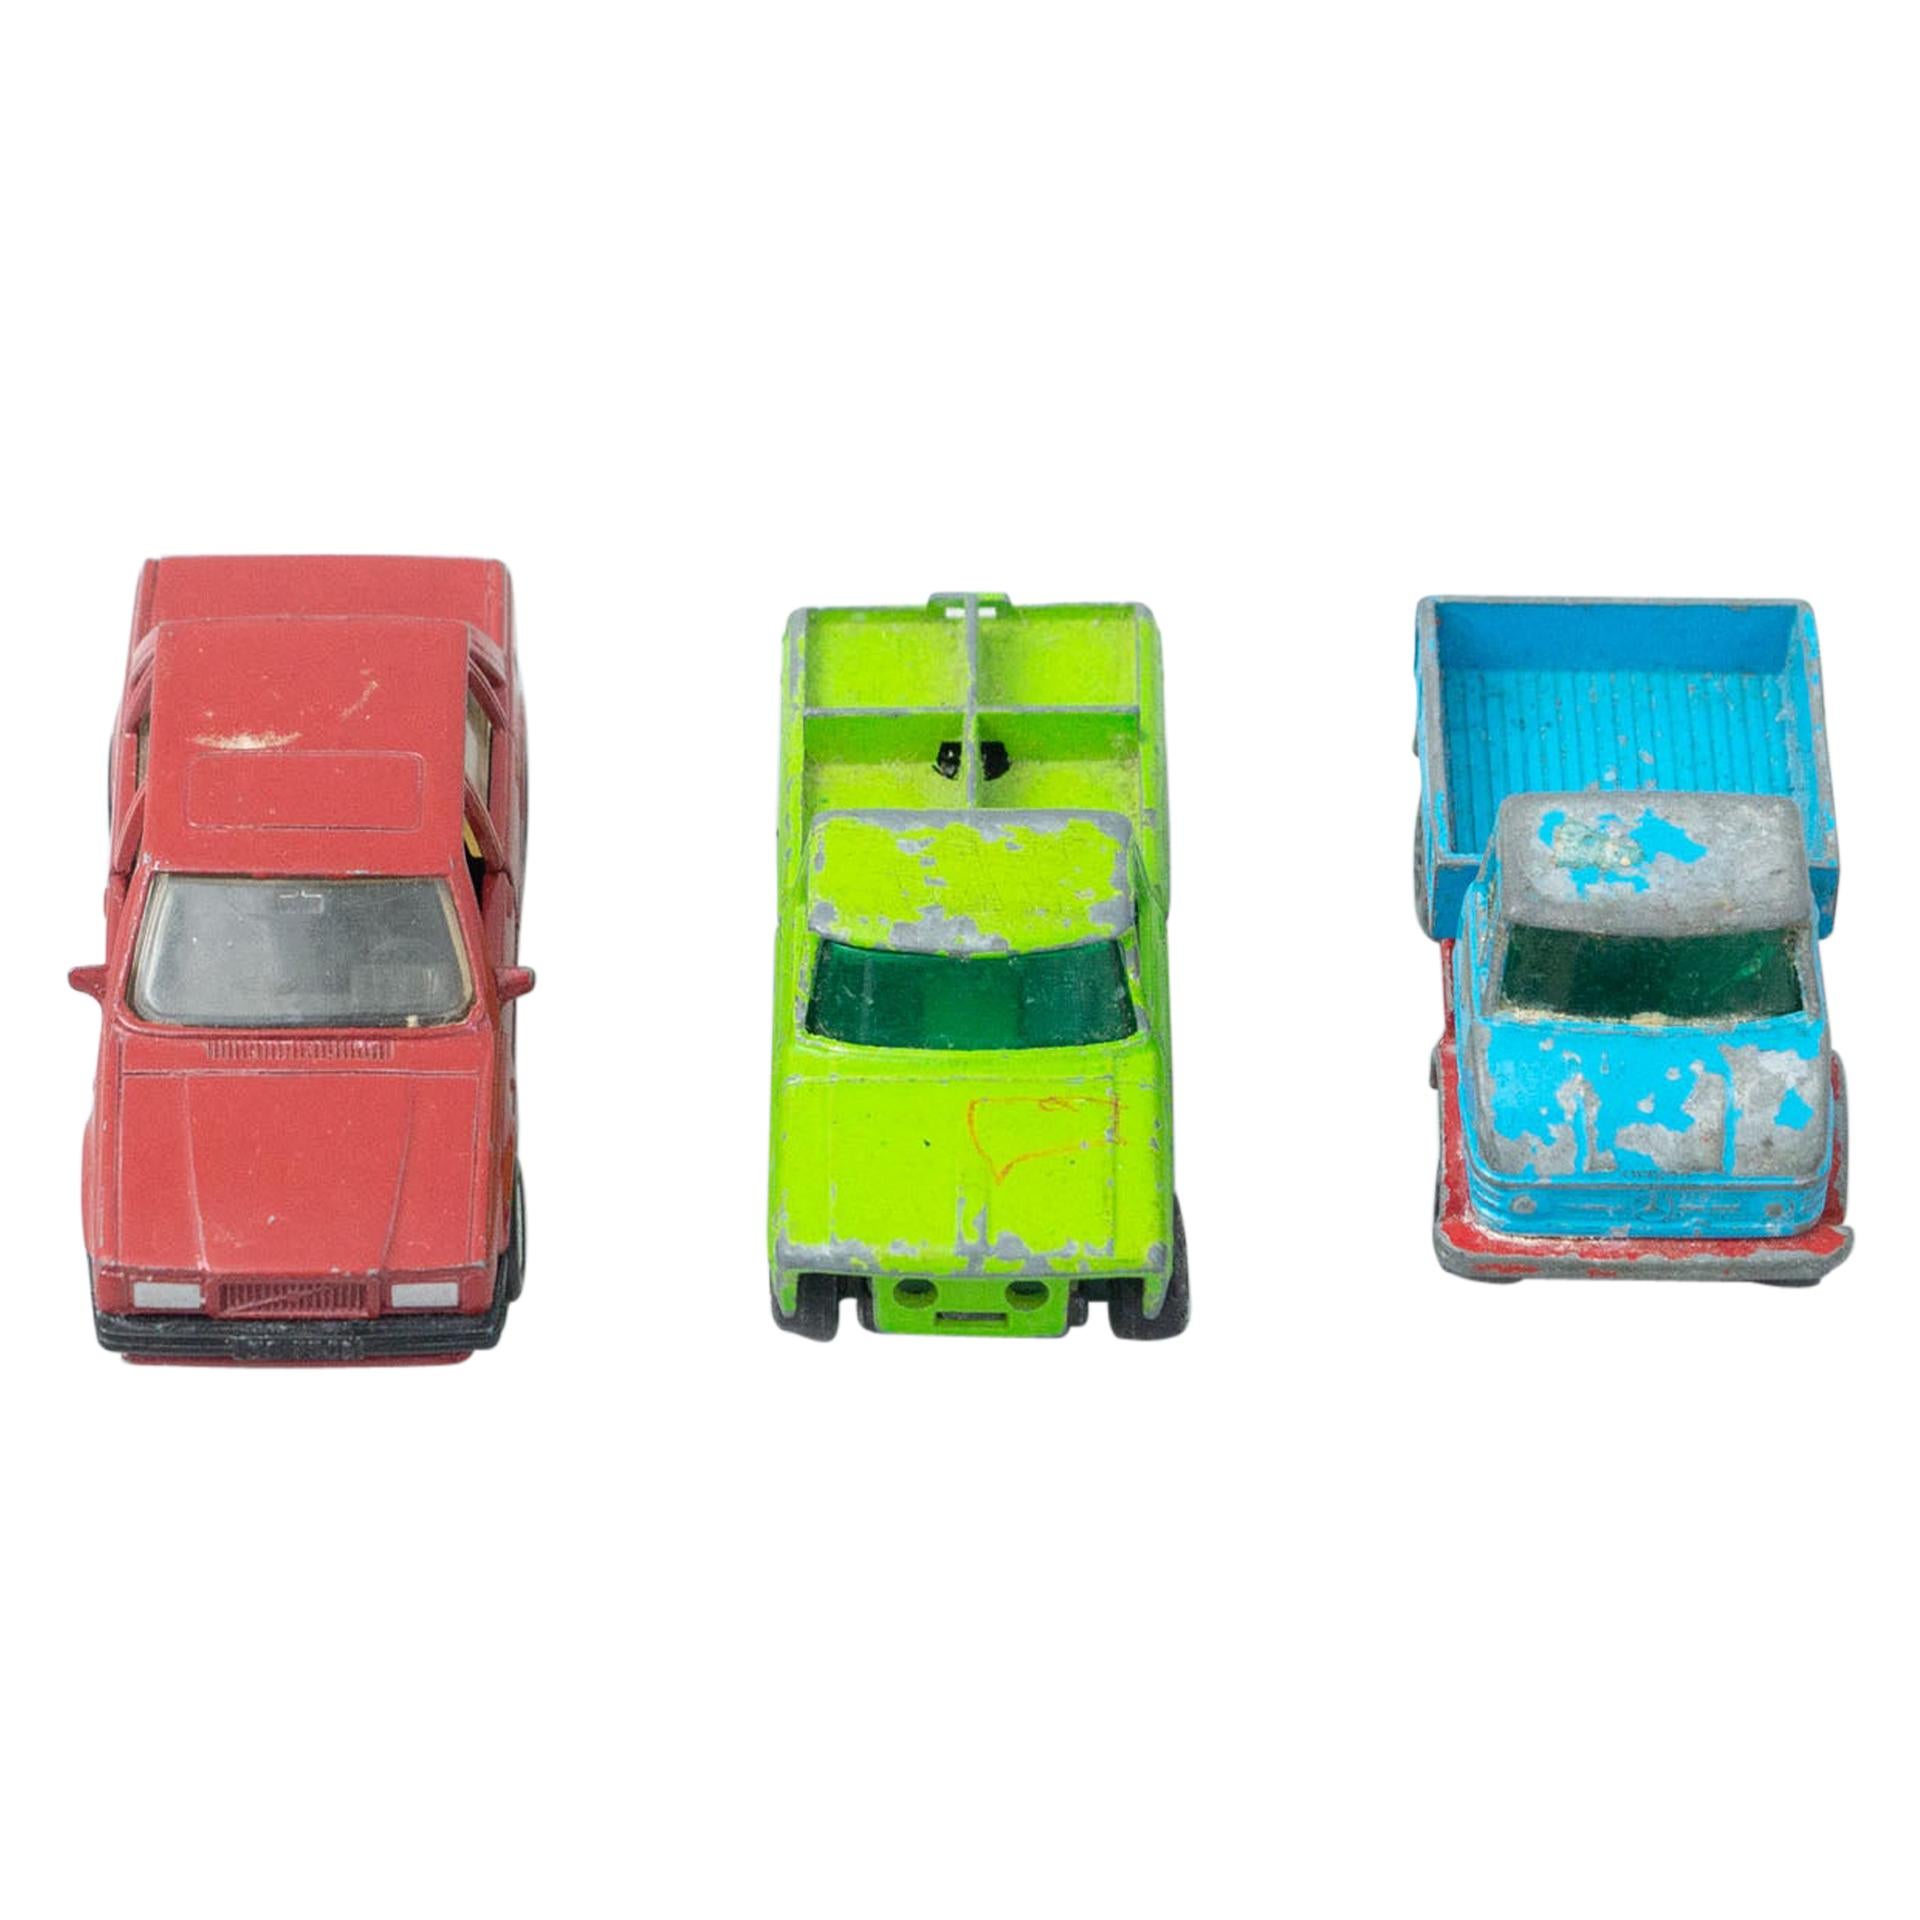 Set of Three Vintage Toy MatchBox Cars, circa 1960 For Sale